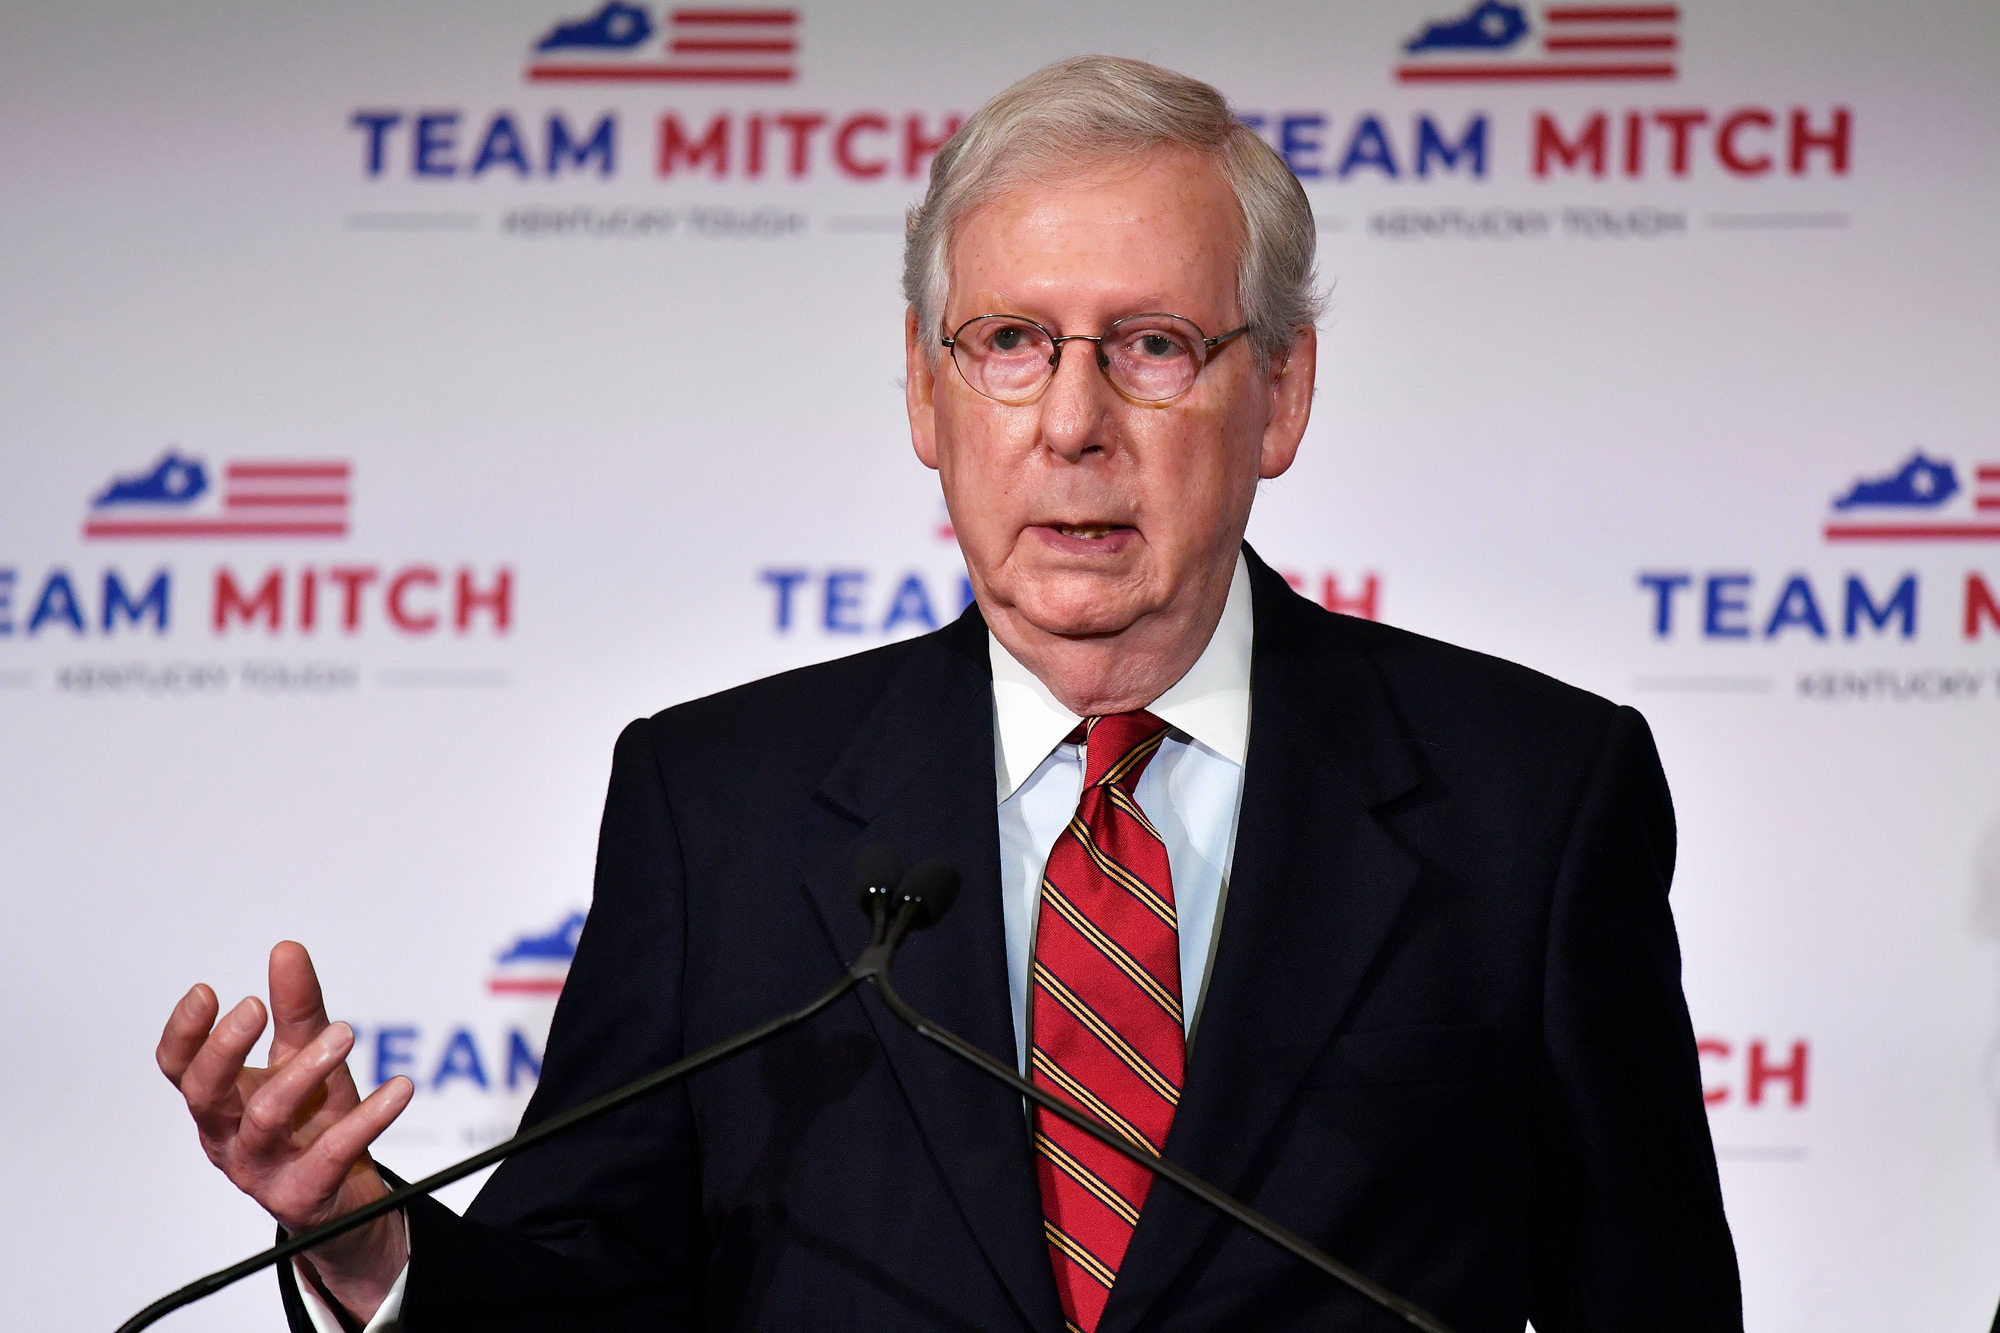 Senate Majority Leader Mitch McConnell speaks with reporters during a press conference in Louisville, Kentucky, on November 4.